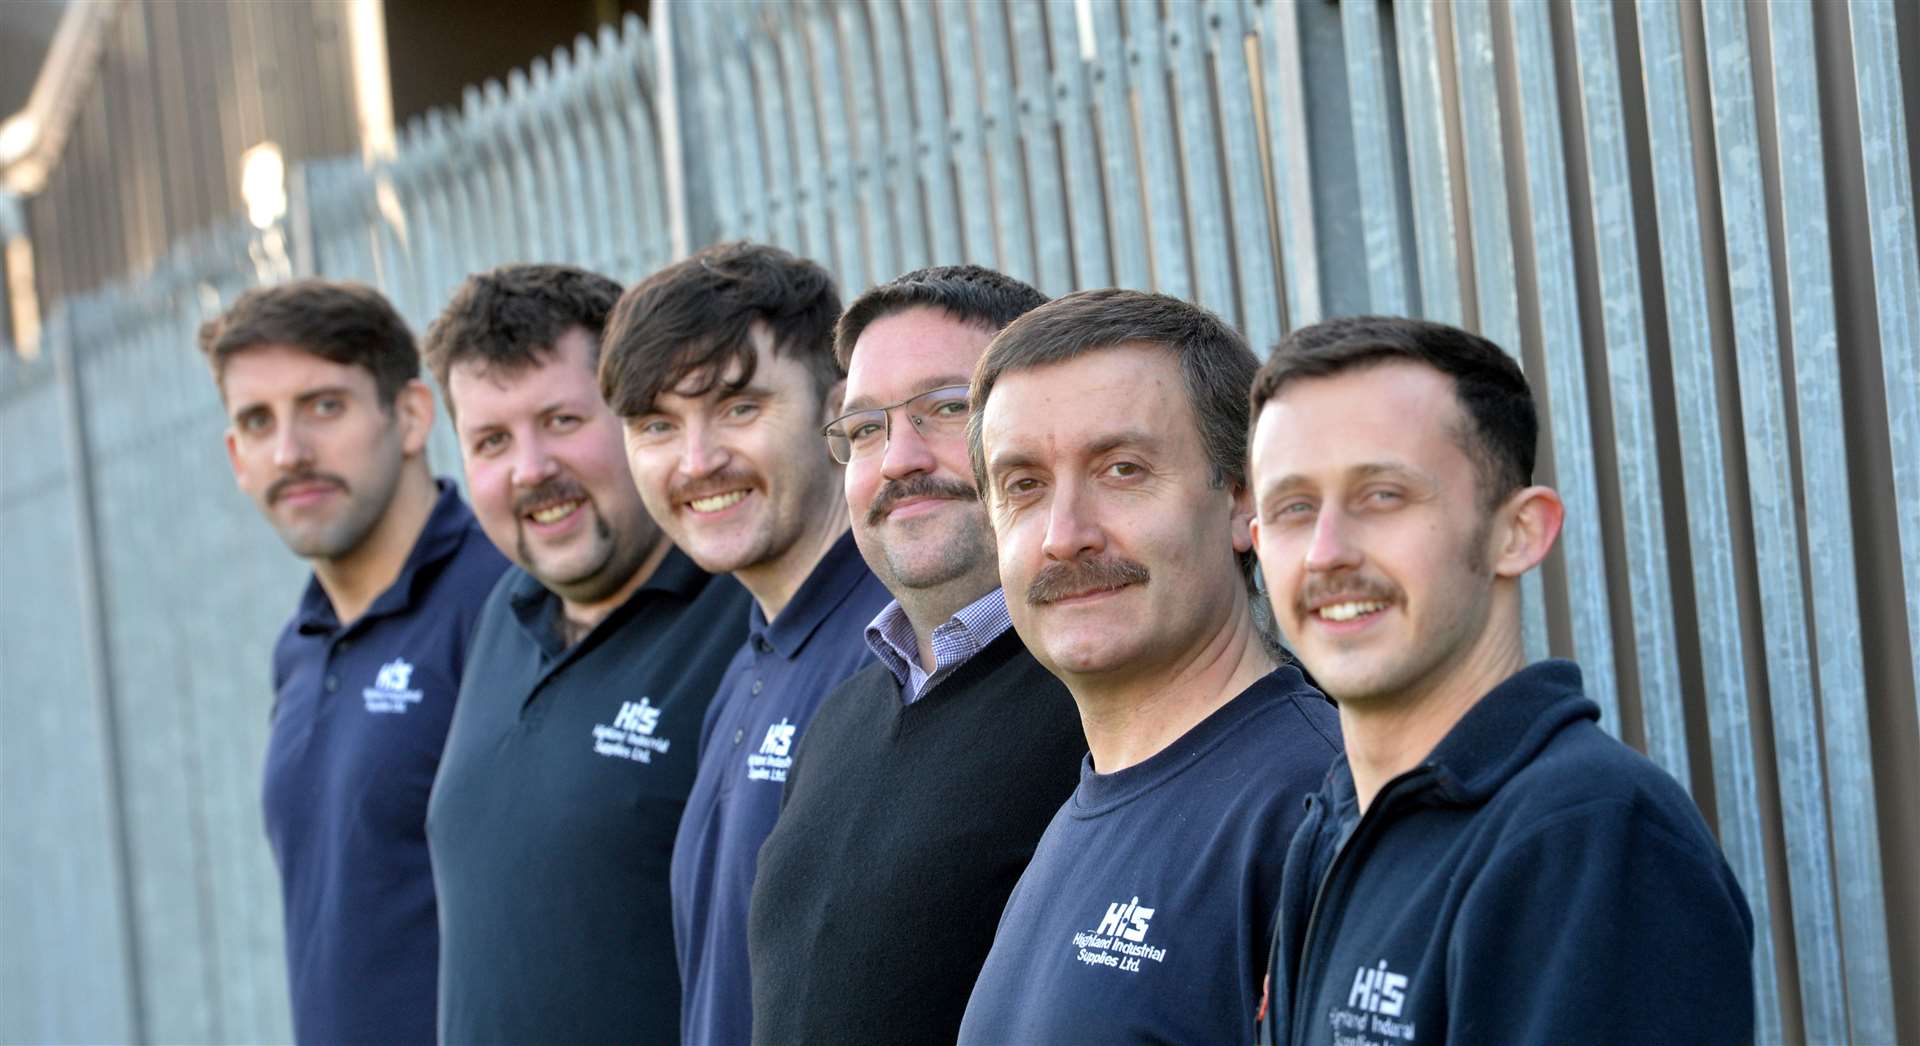 The men at Highland Industrial Supplies show off their moustaches which raised money for Mikeysline.